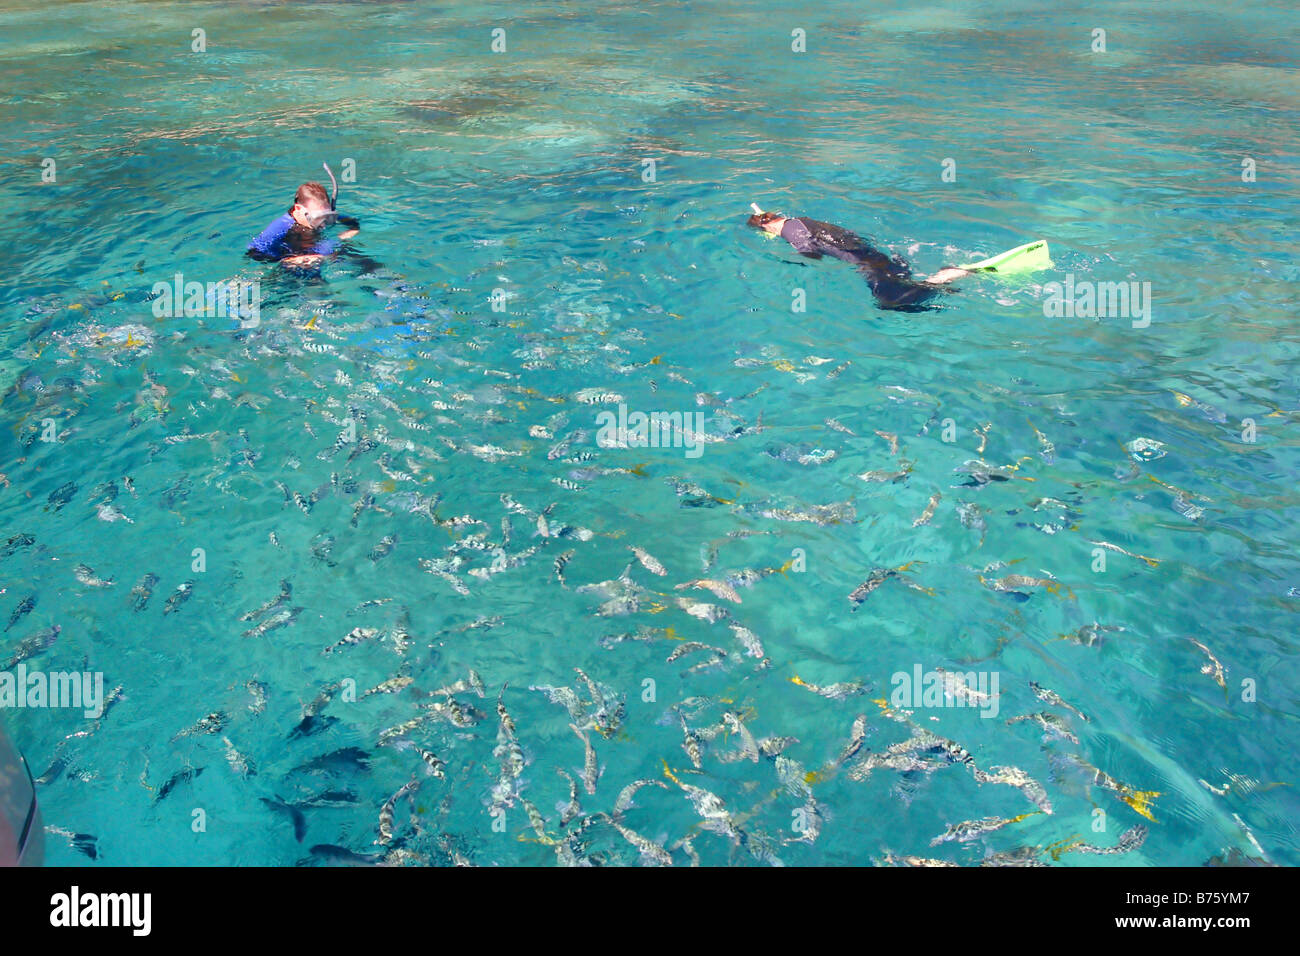 Snorkling for fish 1 Stock Photo